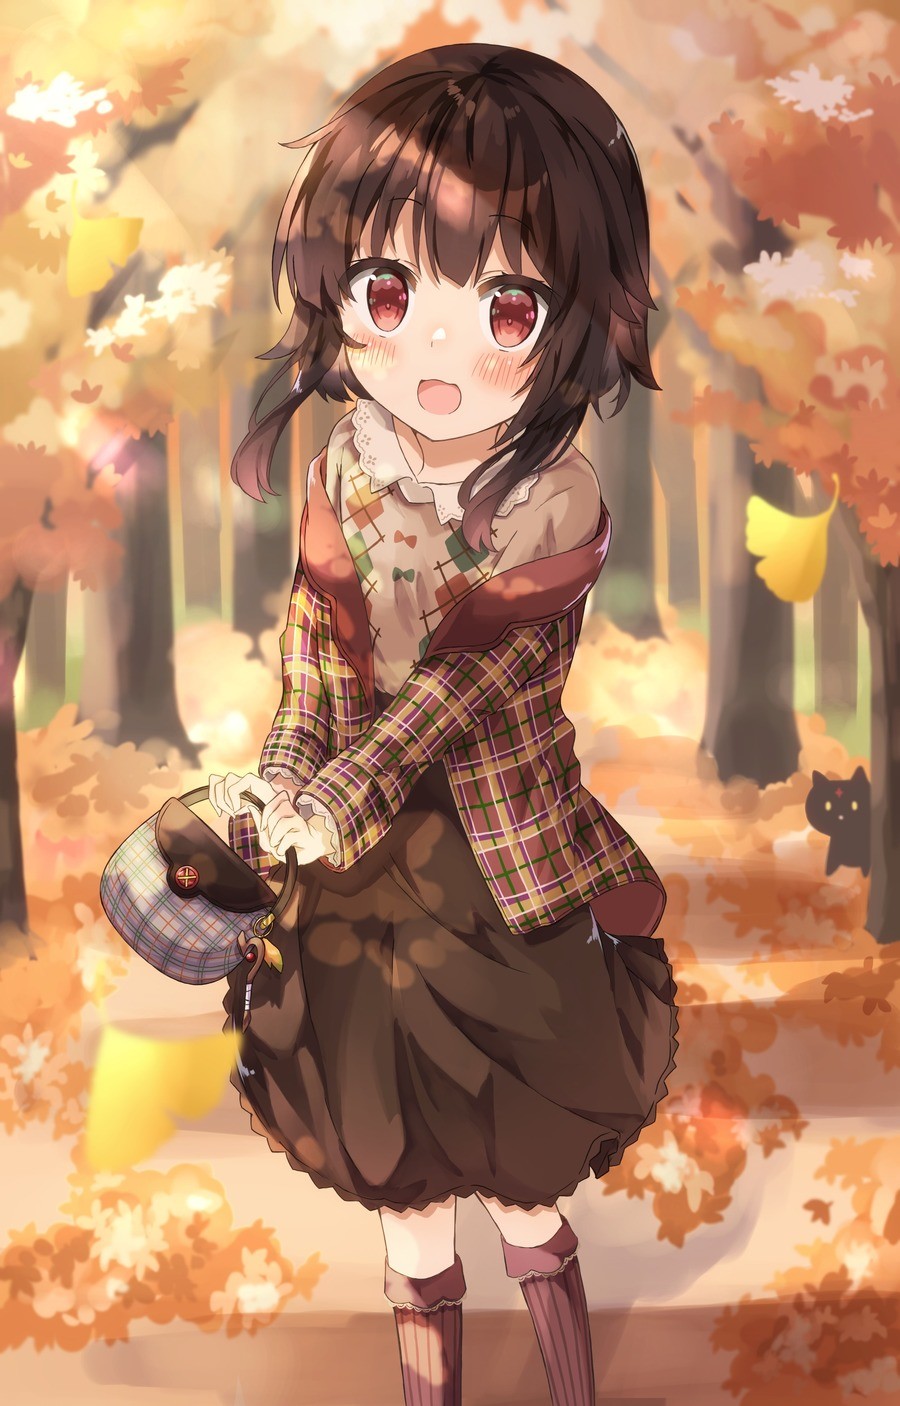 Daily Megu - 929: Autumn Megu. join list: DailySplosion (826 subs)Mention History Source: .. Is it just me, or is something wrong with her leg?